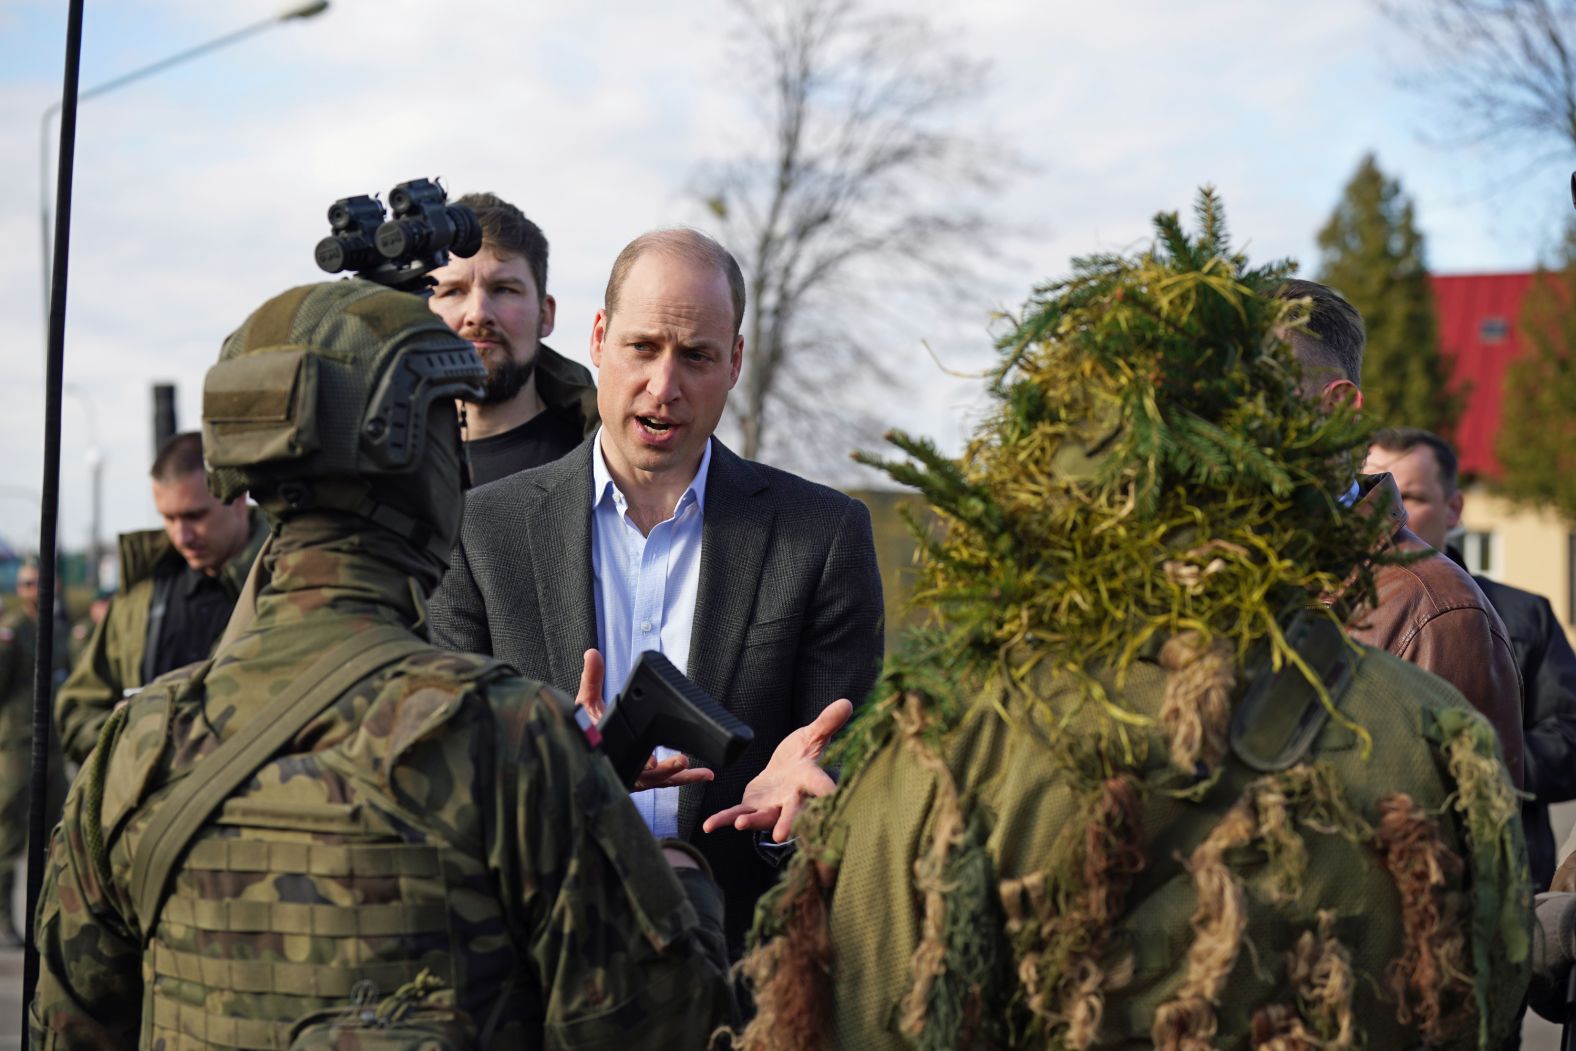 Britain's Prince William meets with members of the Polish military while making <a href="index.php?page=&url=https%3A%2F%2Fwww.cnn.com%2F2023%2F03%2F22%2Feurope%2Fprince-william-poland-intl-gbr%2Findex.html" target="_blank">an unannounced trip to a military base near the Ukrainian-Polish border</a> on Wednesday, March 22. He also met with British troops stationed there, praising both groups for their "cooperation in the support of the people of Ukraine and their freedom."